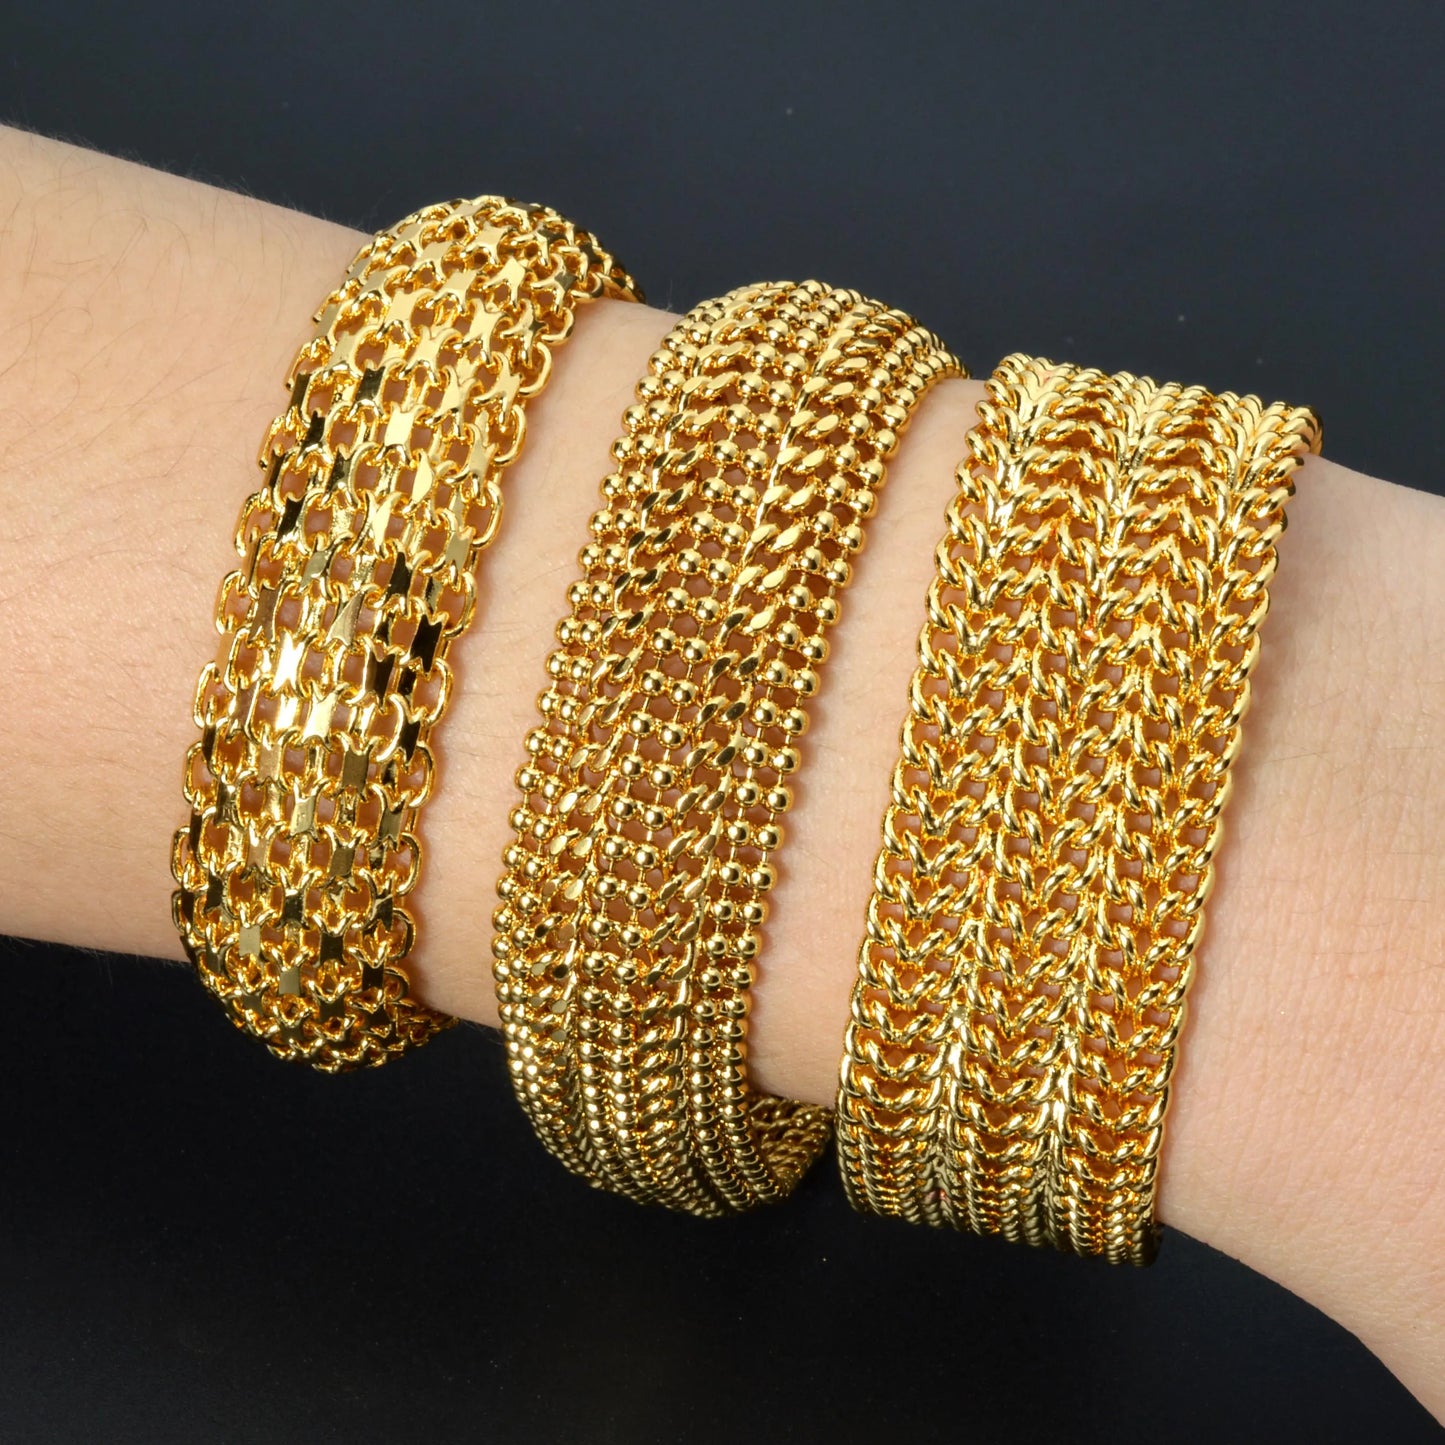 Sunny Jewelry 12MM-20MM Big Wide For Women Men Bracelet 18K Gold Plated Double Weaving Rolo Cable Curb Unisex Link Chain Gift